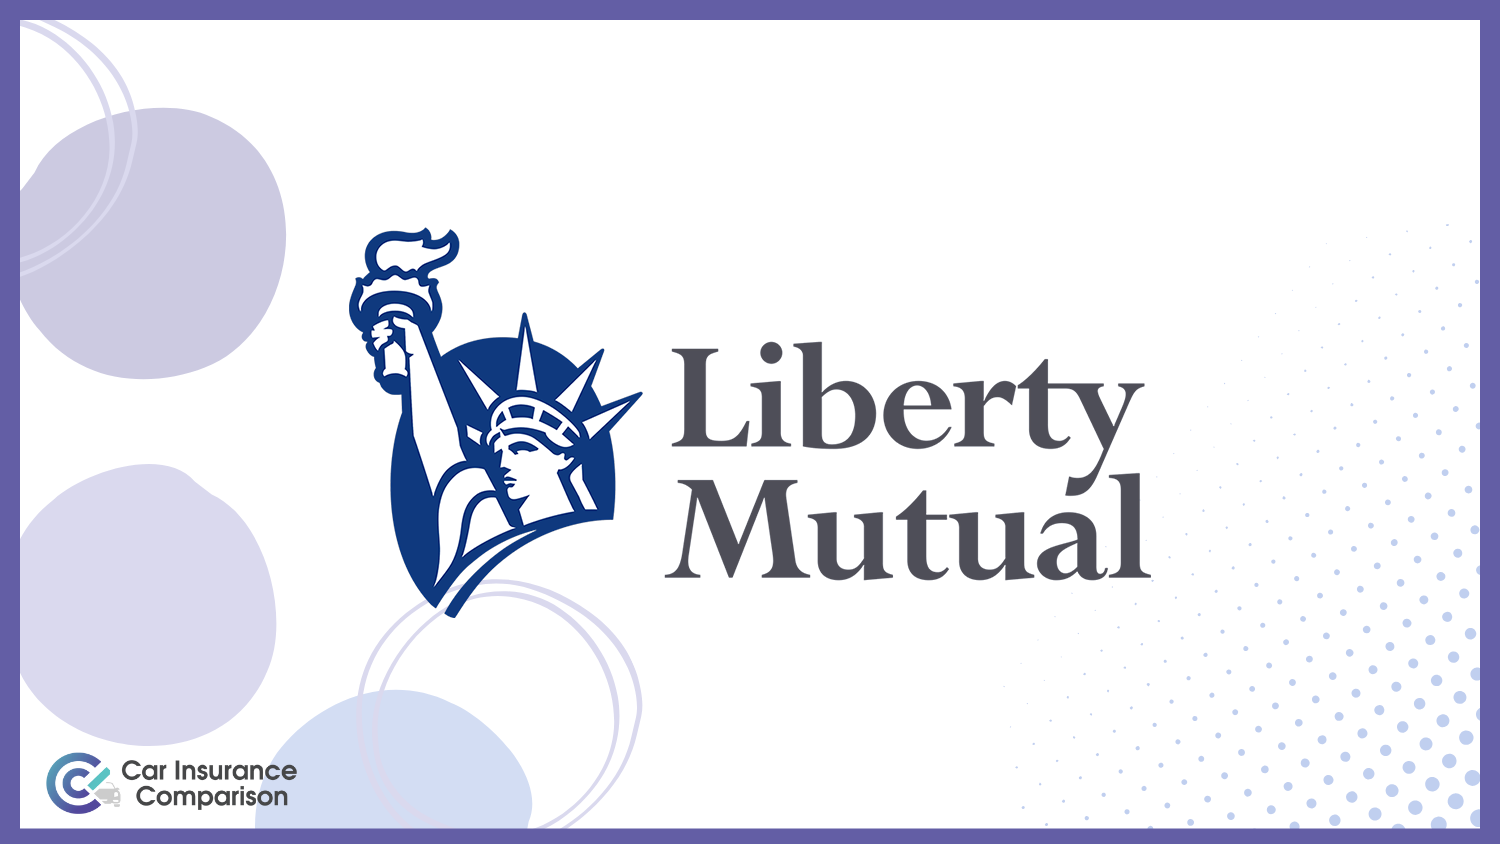 Liberty Mutual: Compare Professional Engineer Car Insurance Rates